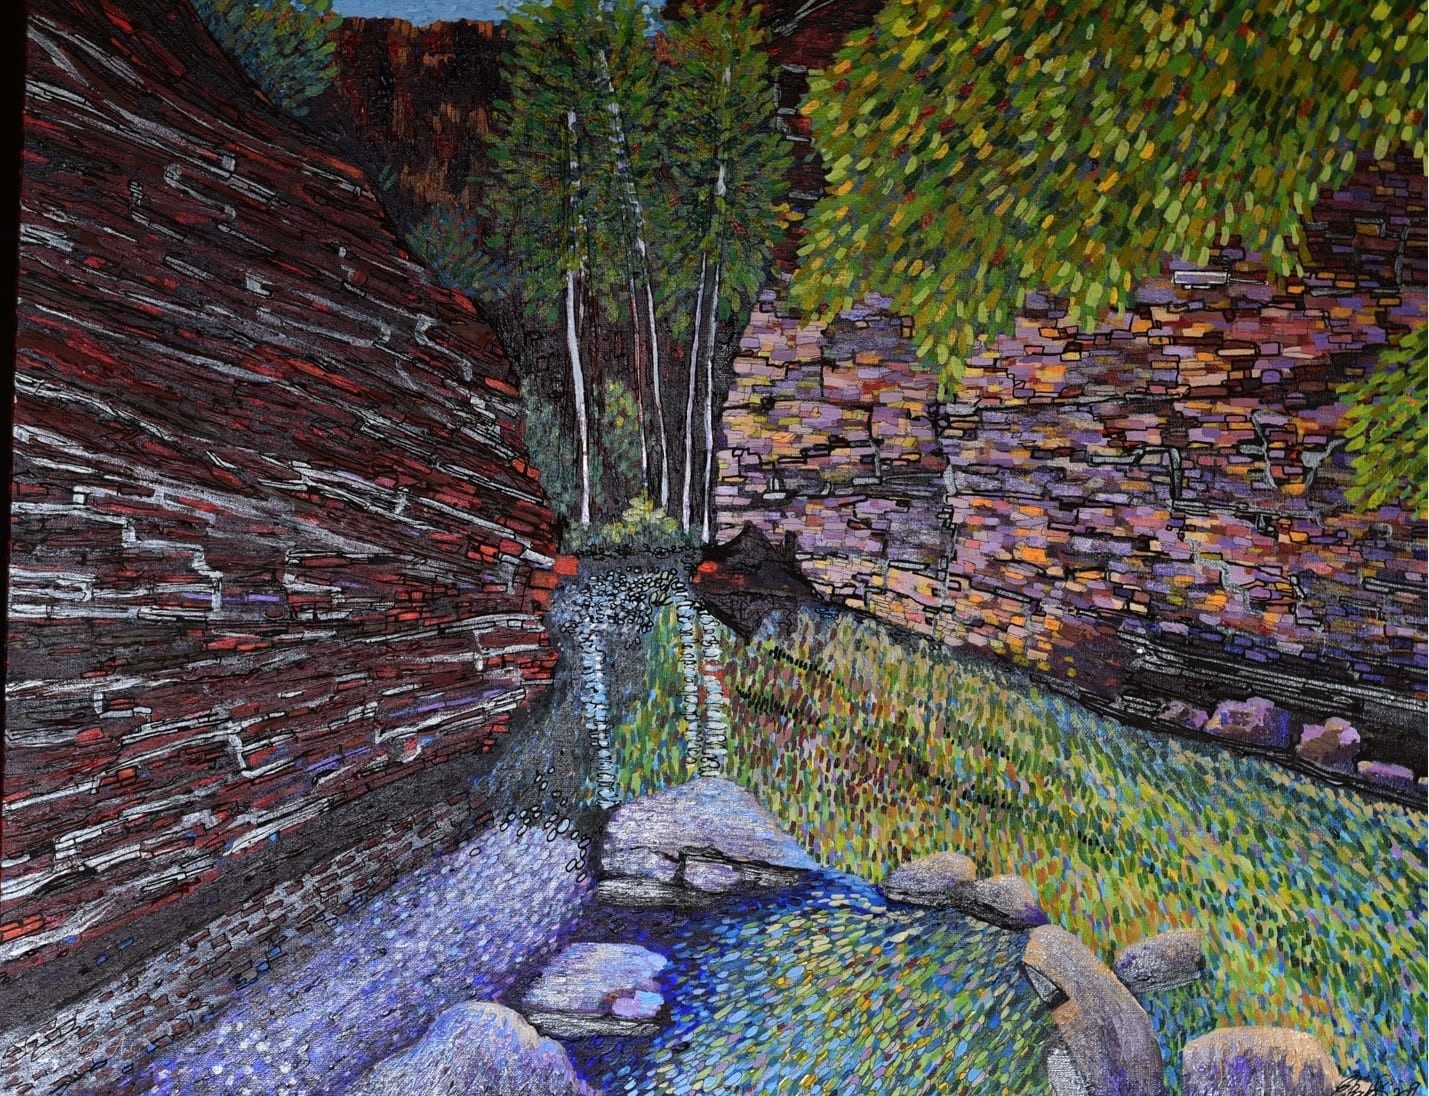 The painting of Reflecting at Weano Gorge